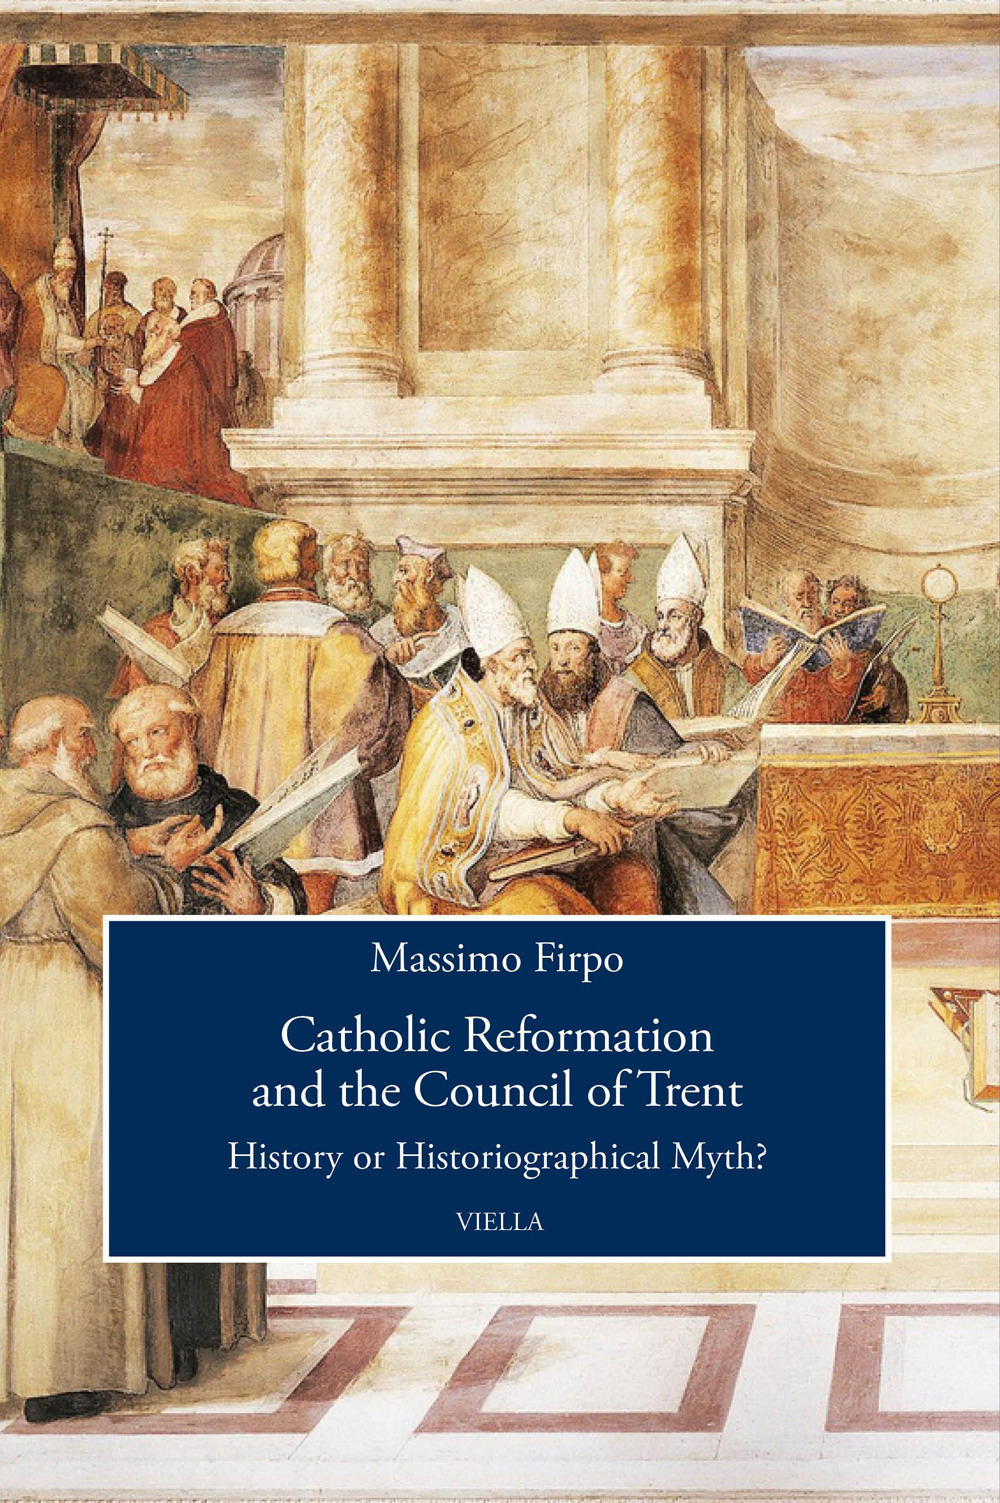 Catholic reformation and the Council of Trent. History or historiographical Myth?